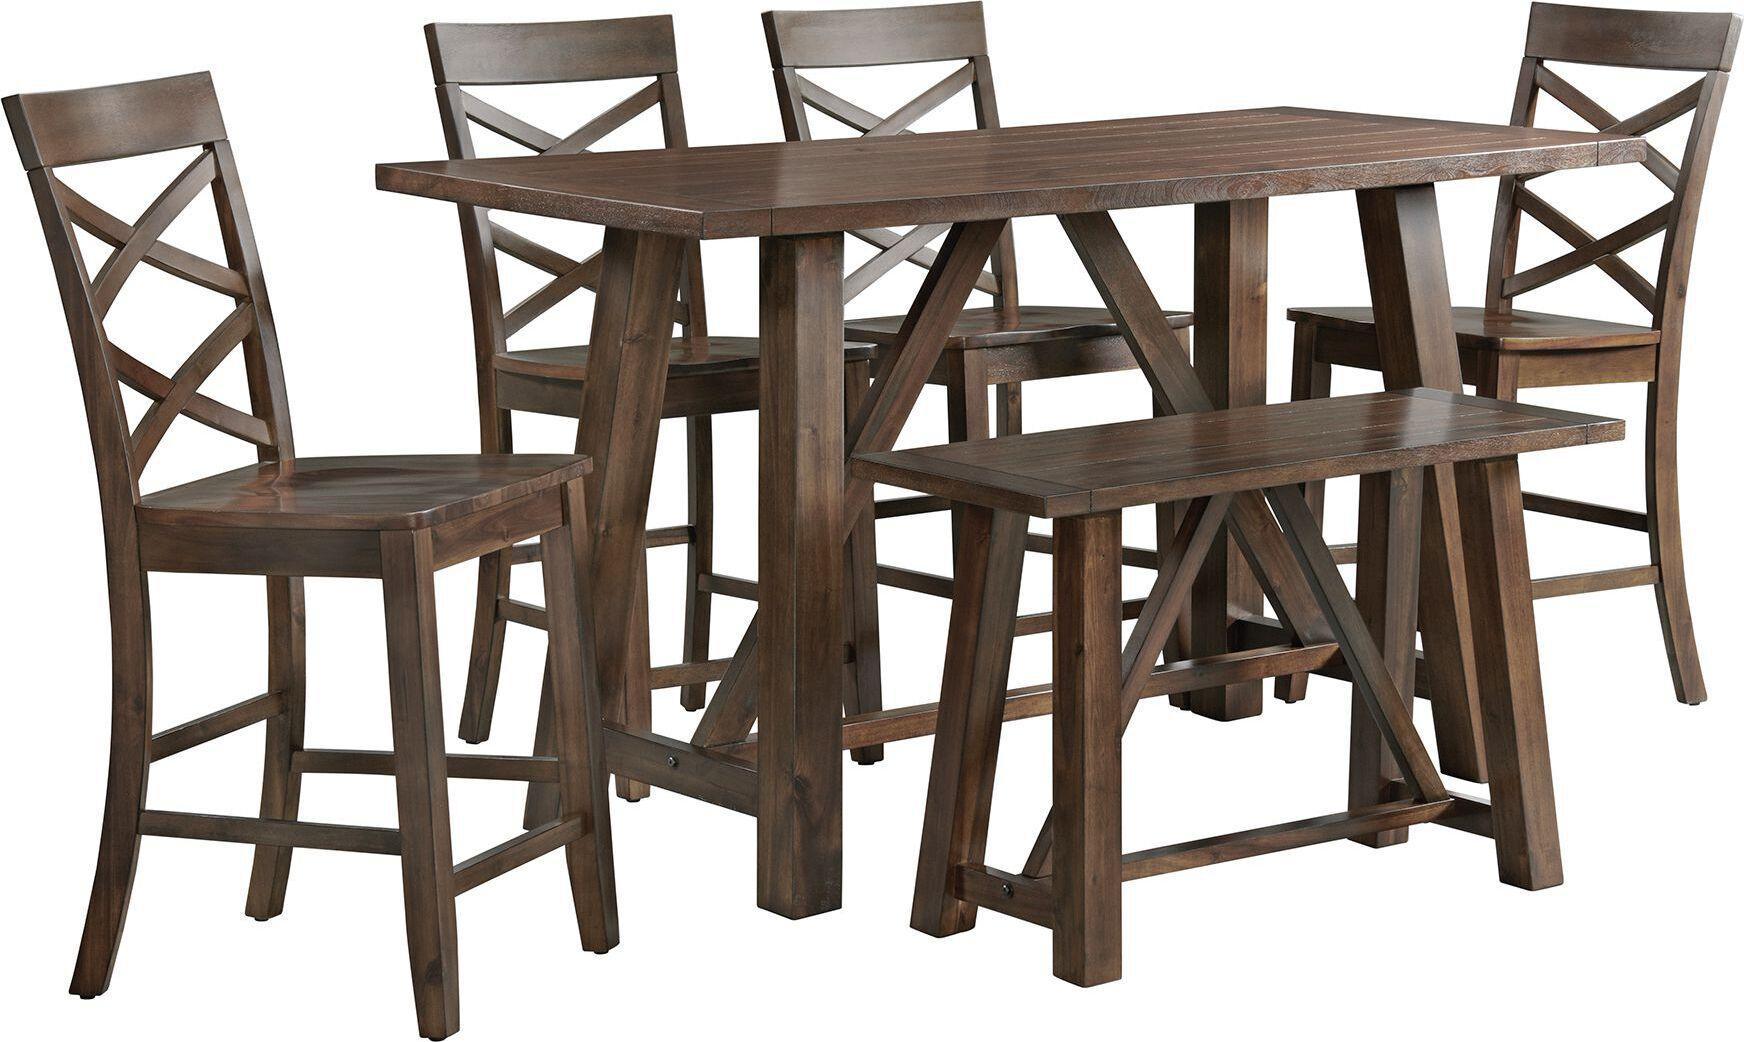 Elements Dining Sets - Regan 6PC Counter Height Dining Set in Cherry-Table, 4 Side Chairs & Bench